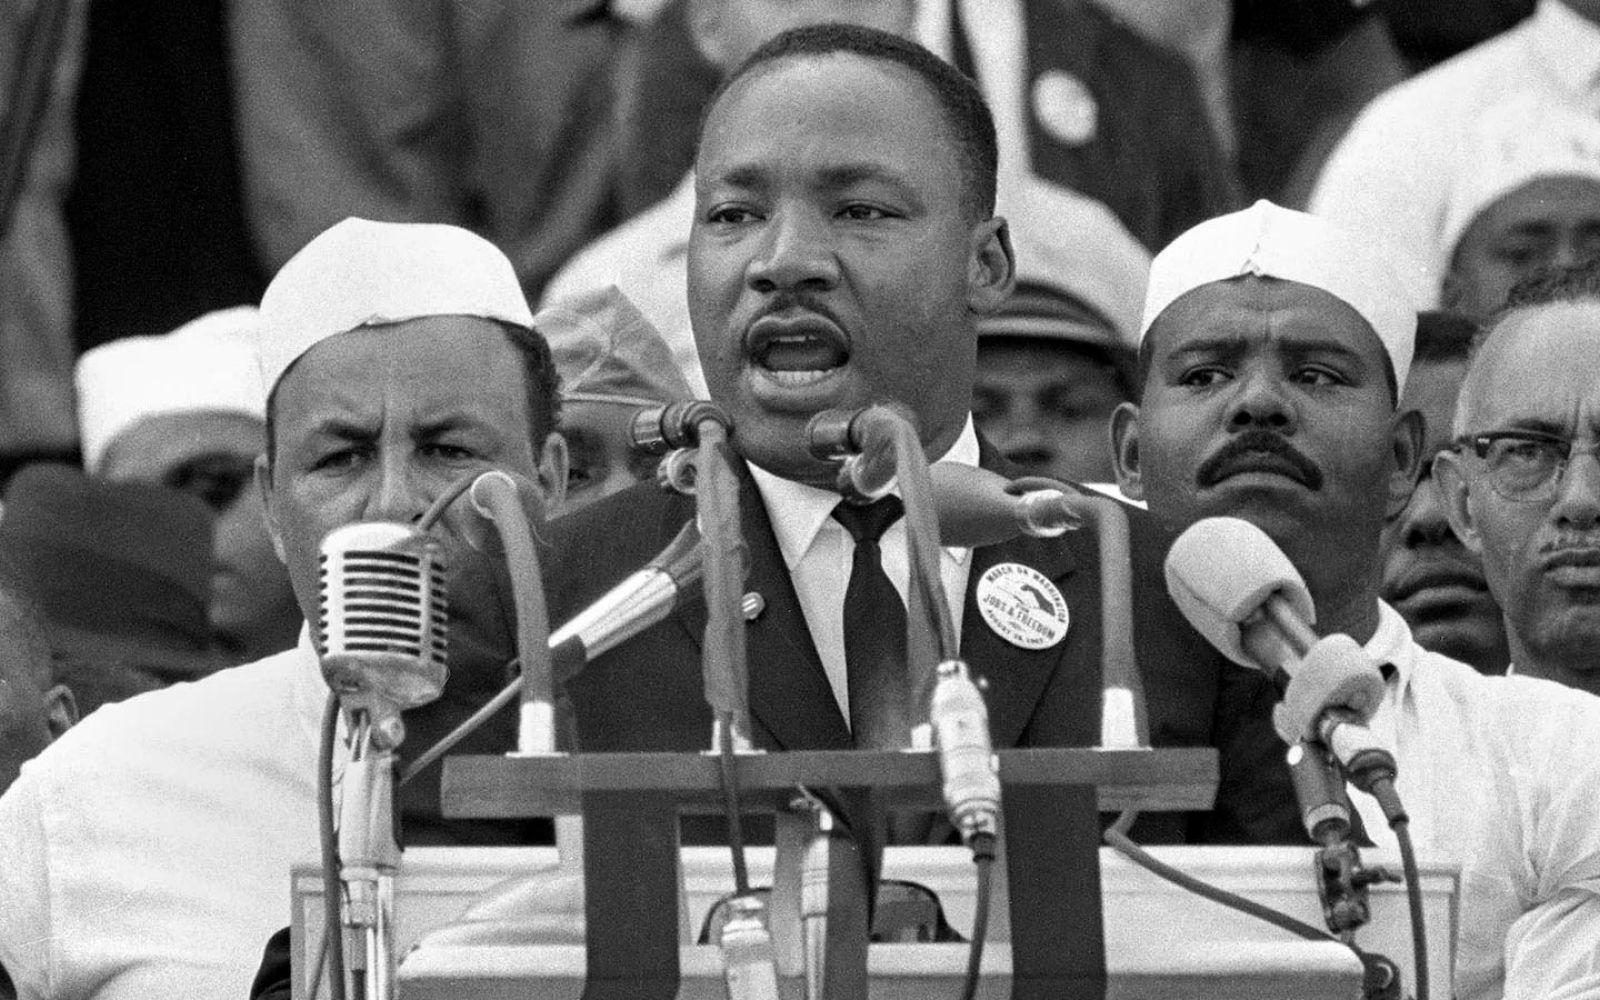 Back to the Mountaintop at Embassy Theatre on April 3 will honor King's "I Have a Dream" speech.